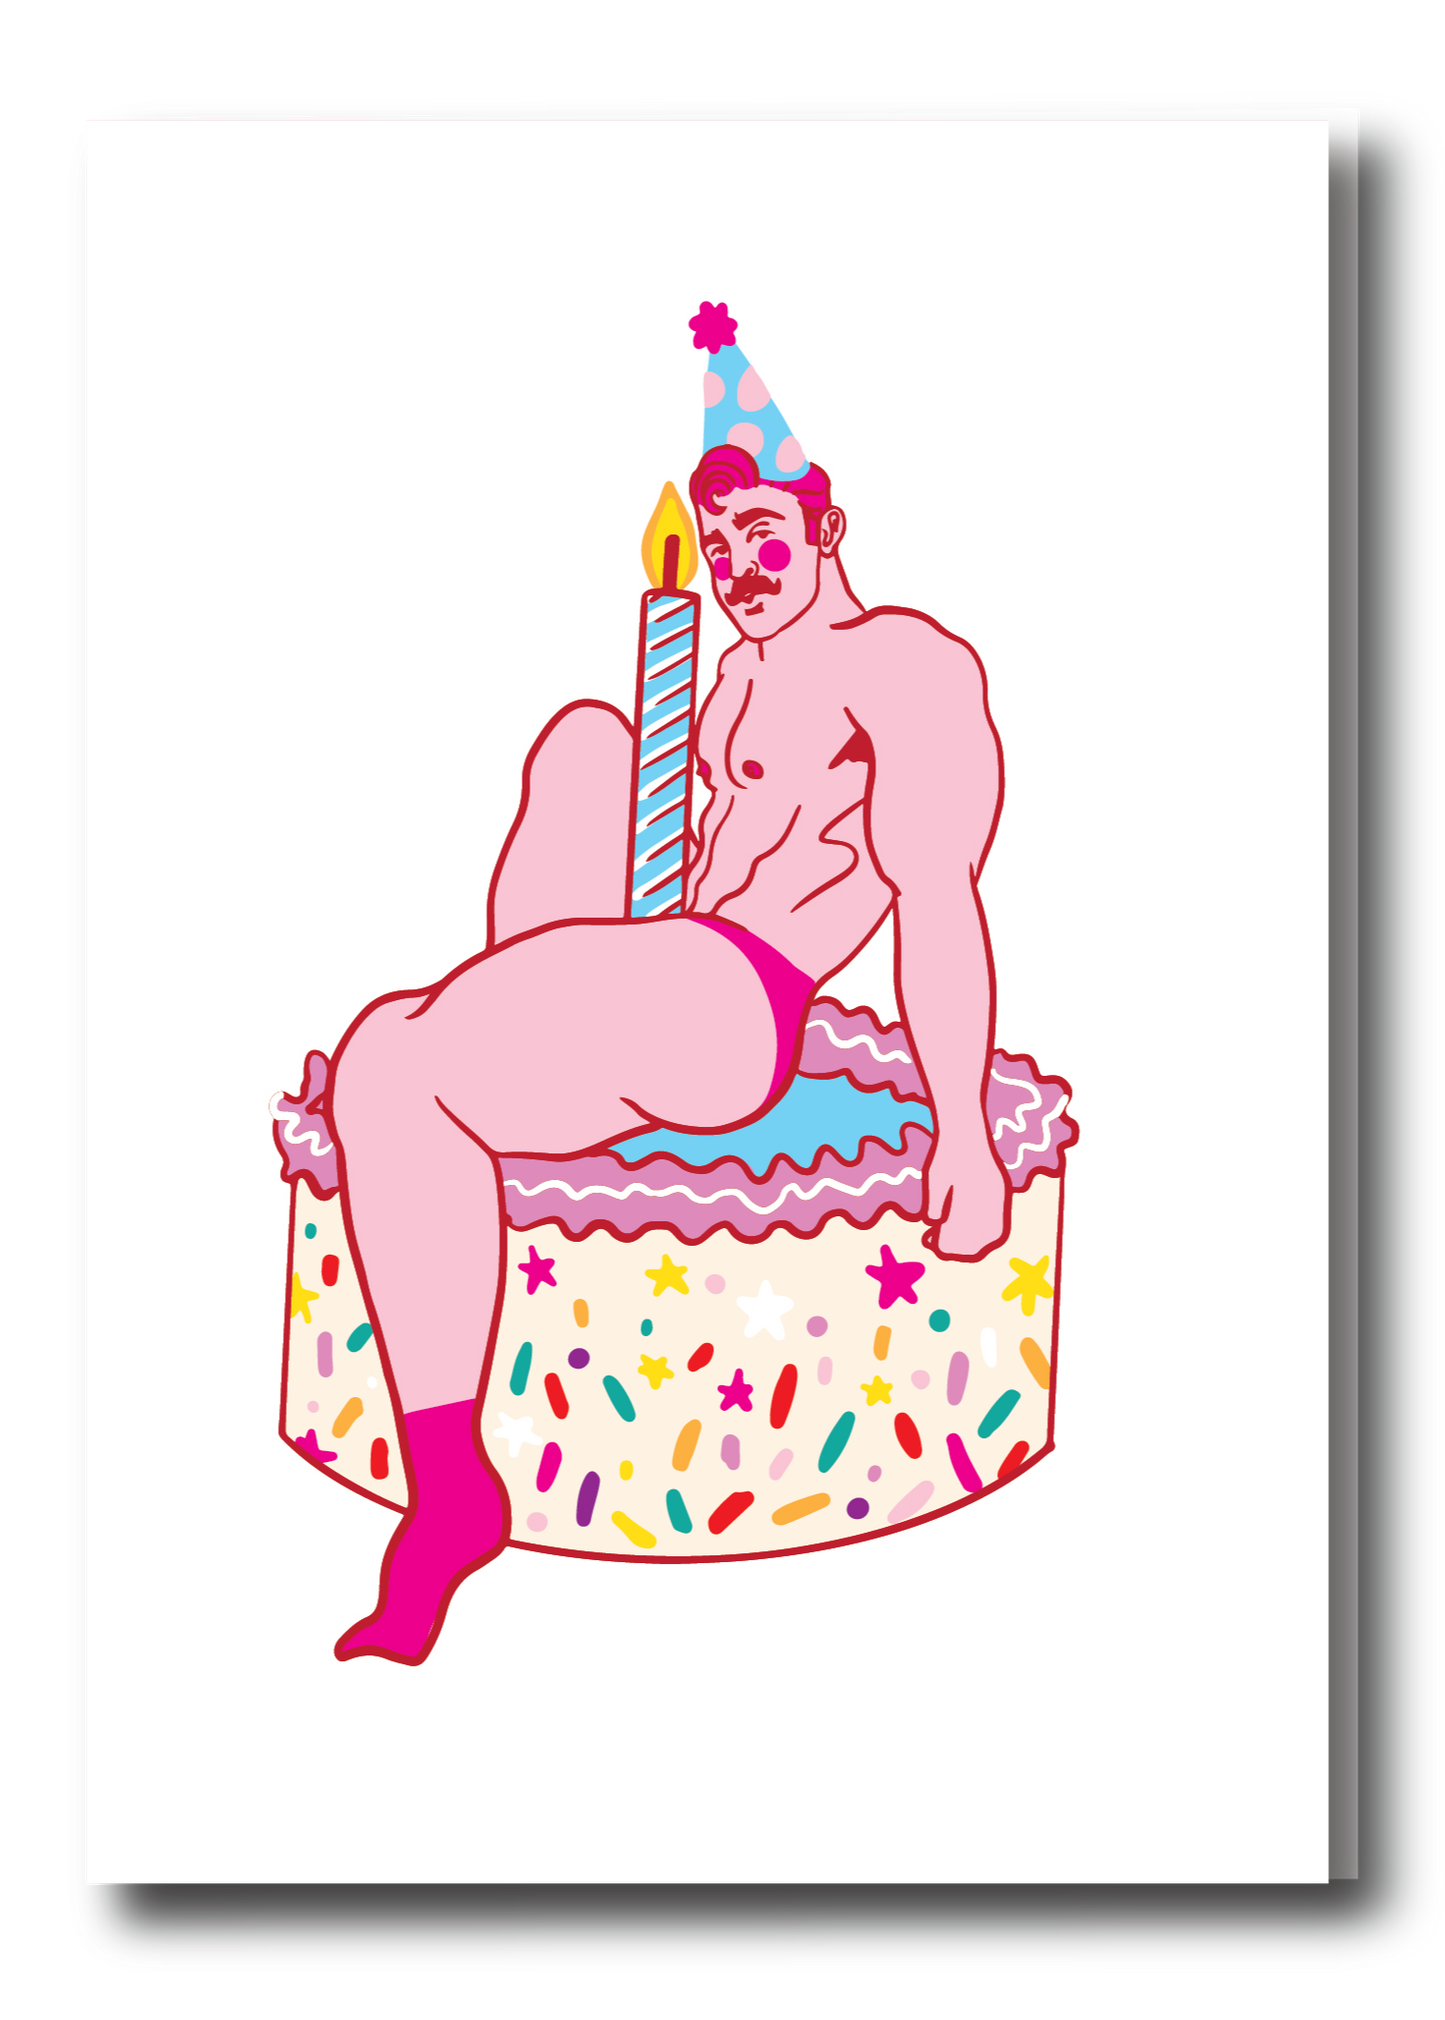 THE WHOLE CAKE BIRTHDAY PIN UP GREETING CARD